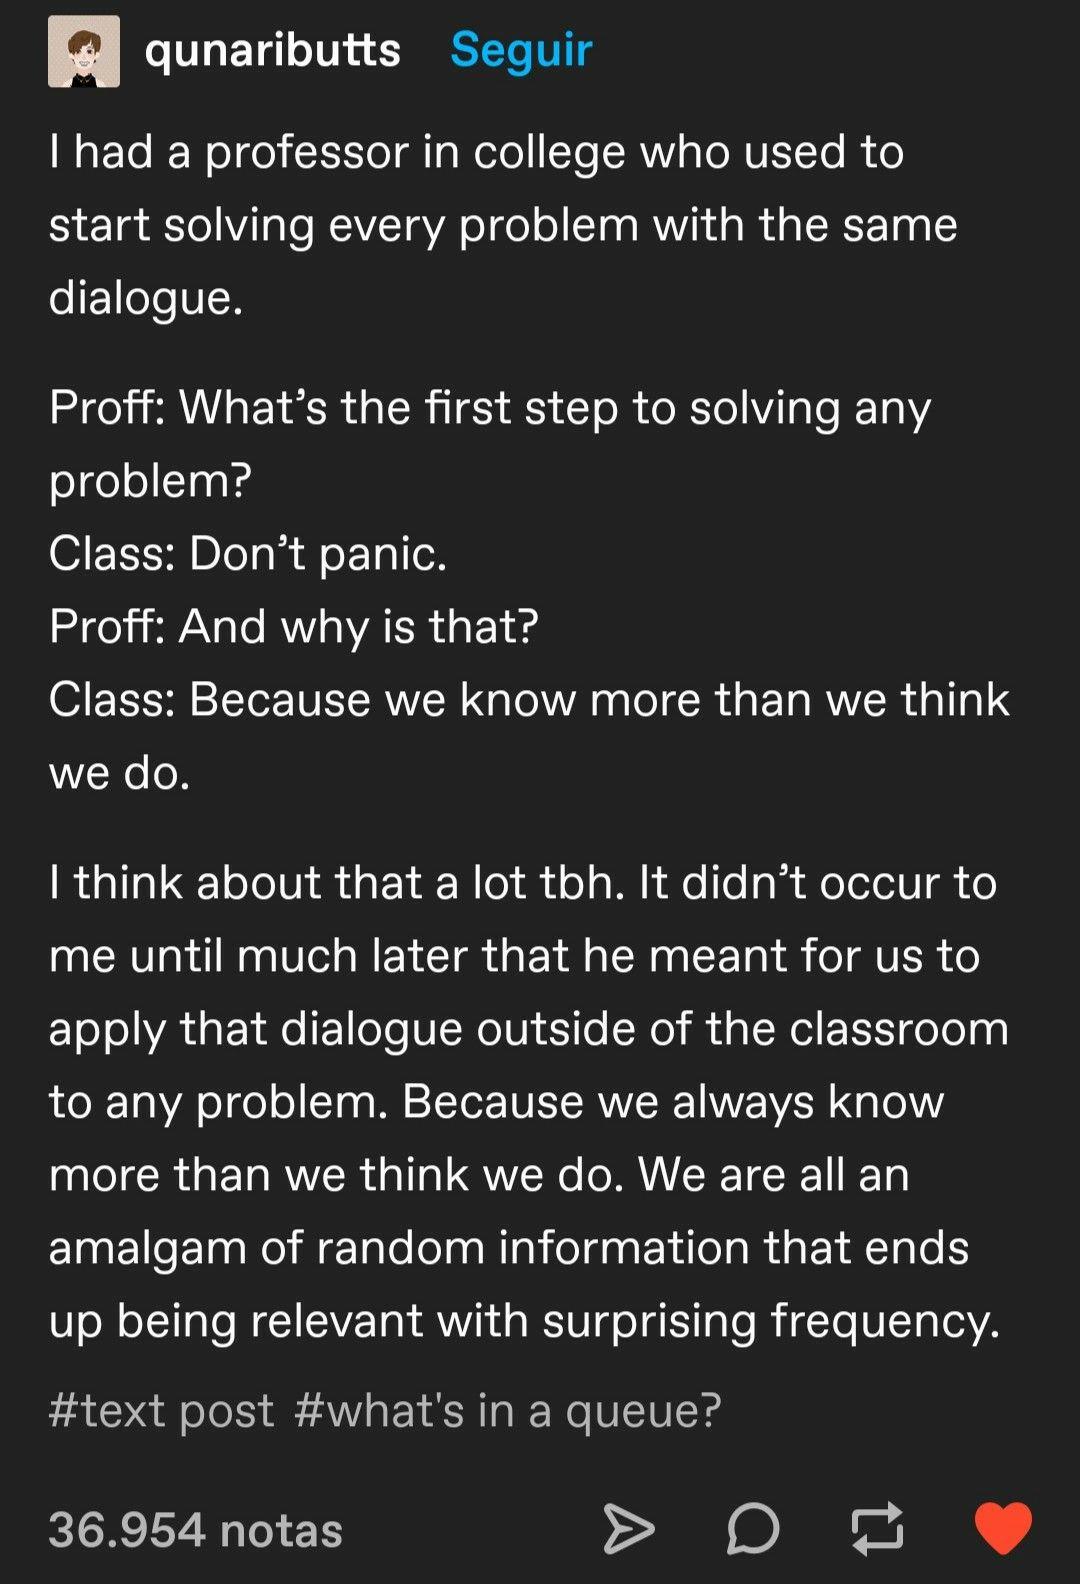 Meme/quote from qunaributts says: I had a professor in college who used to start solving every problems with the same dialogue. Proff: What's the first step to solving any problem? Class: Don't panic. Proff: And why is that? Class: Because we know more than we think we do.

I think about that a lot tbh. It didn't occur to me until much later that he meant for us to apply that dialogue outside the classroom to any problem. Because we always know more than we think we do. We are all an amalgam of random information that ends up being relevant with surprising frequency.